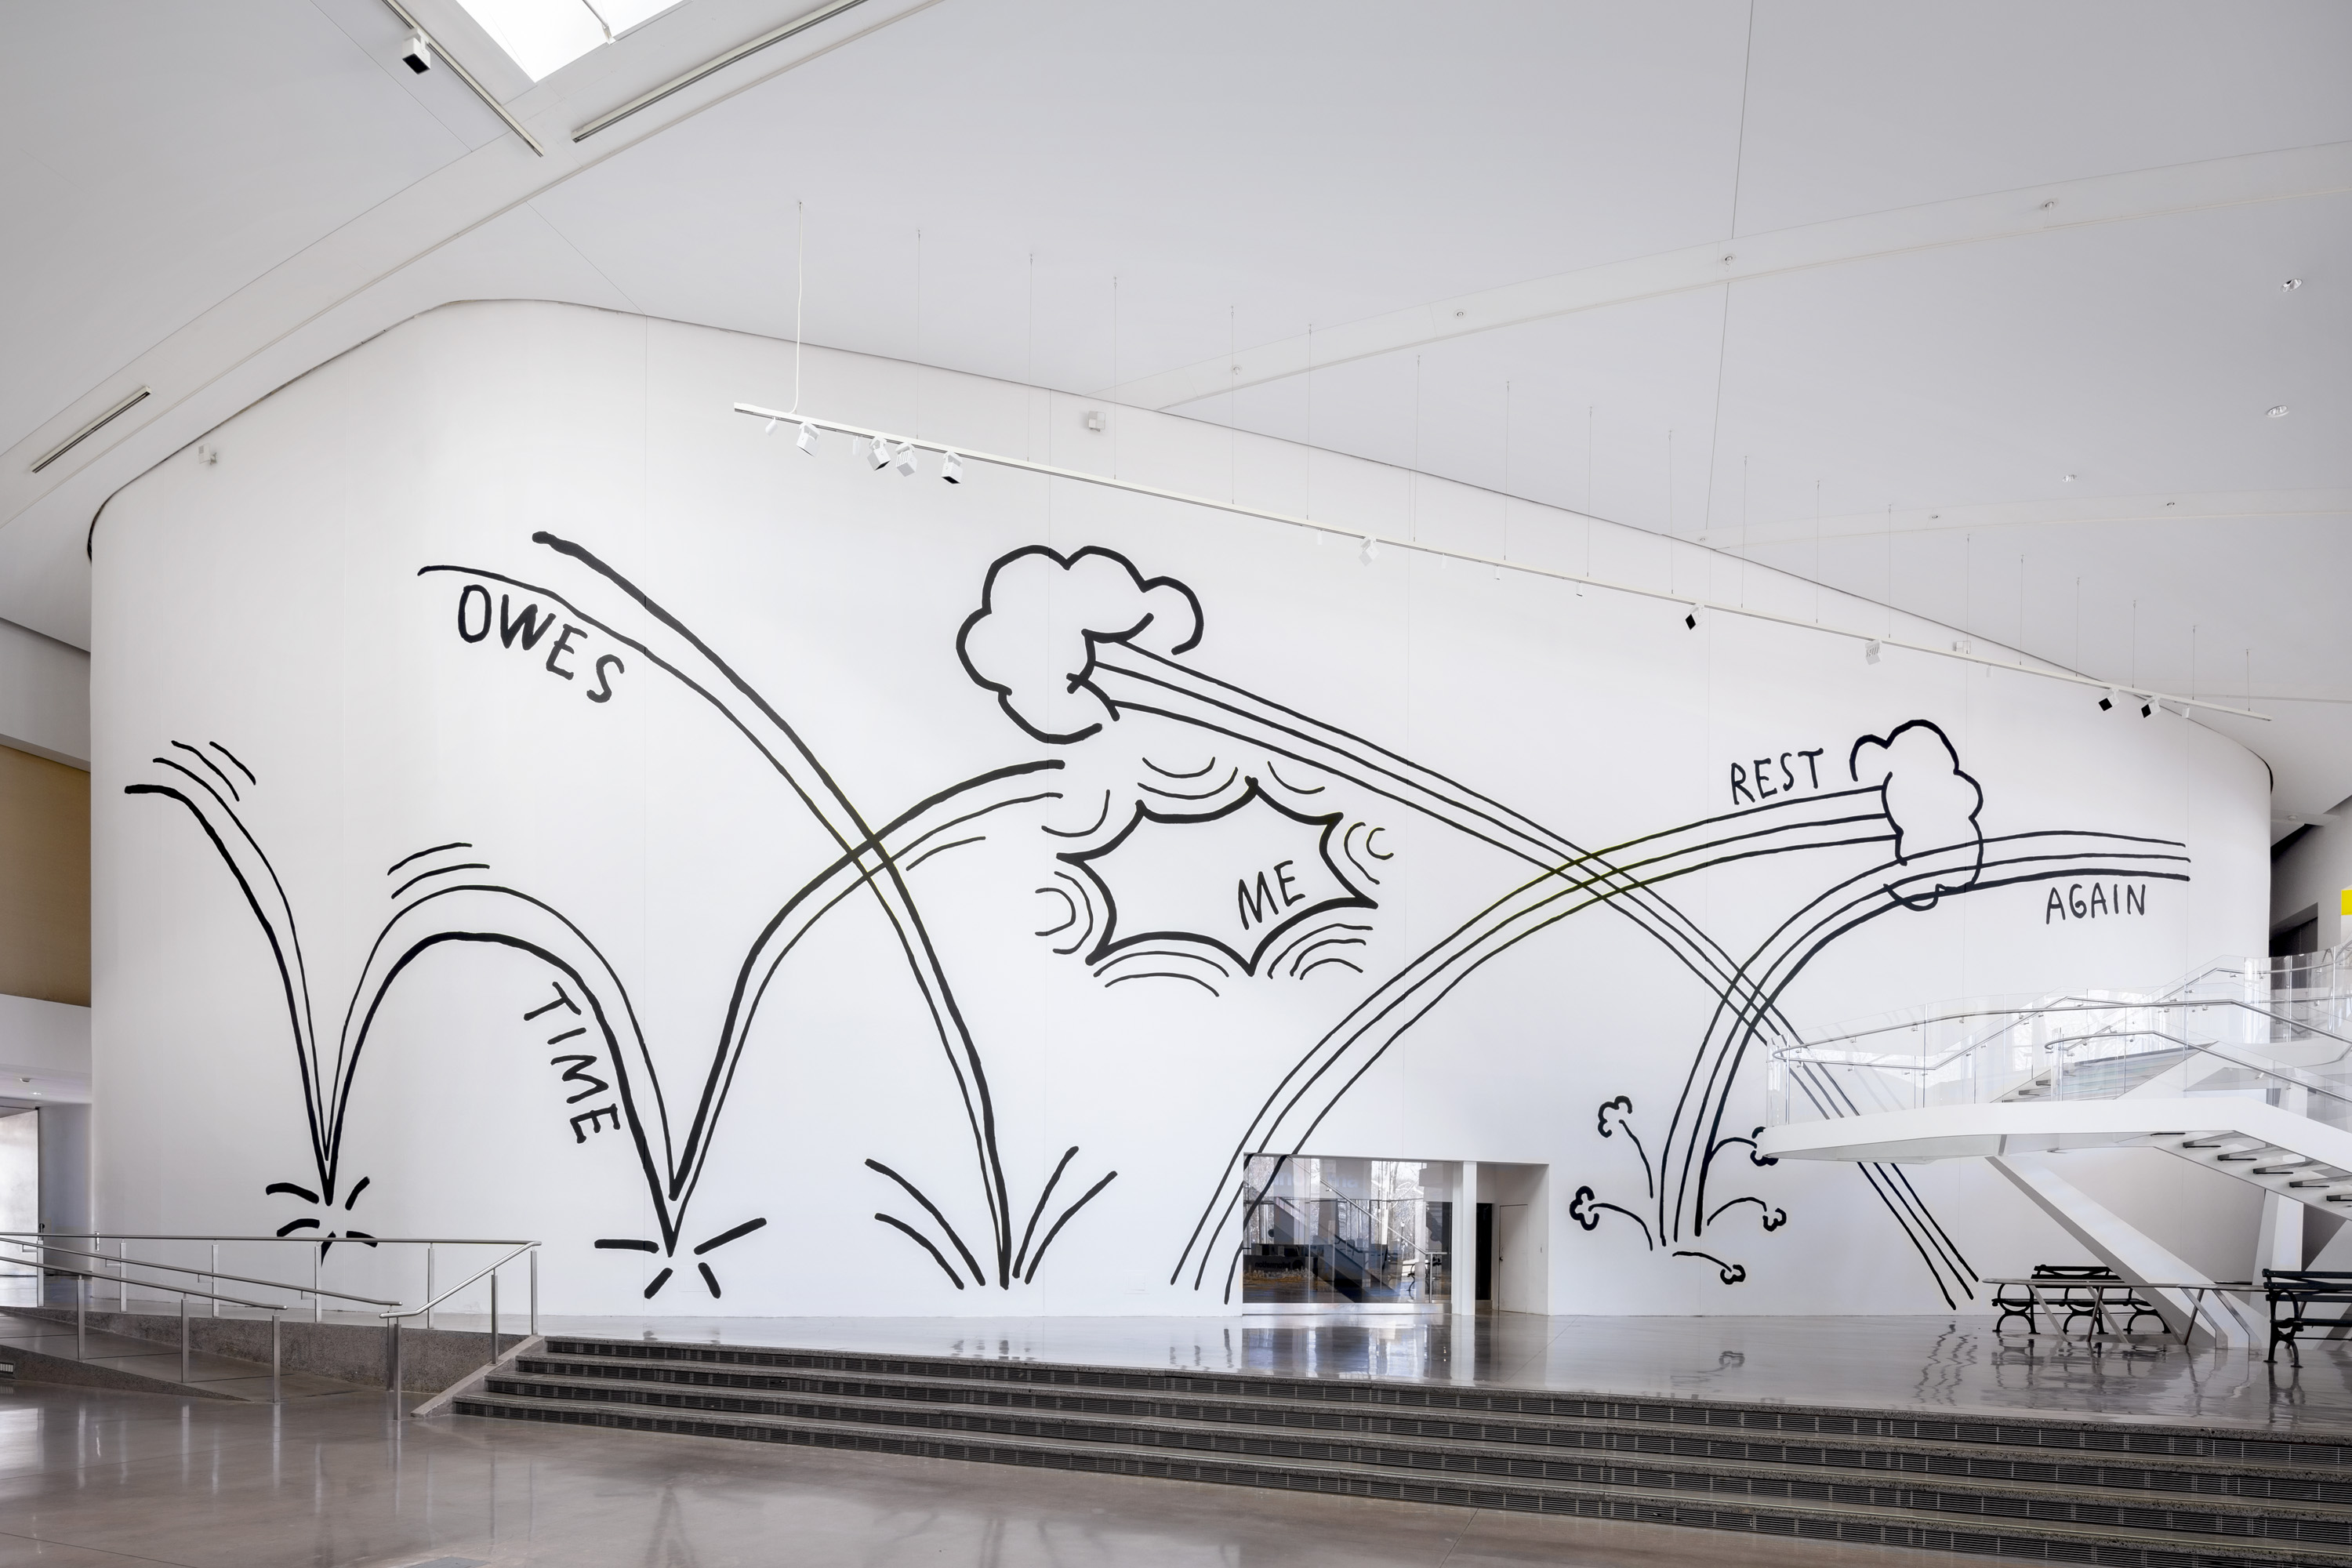 Large mural on a white wall with thick black lines, by Christine Sun Kim "Time Owes Me Rest Again" in the main lobby area of Queens Museum.